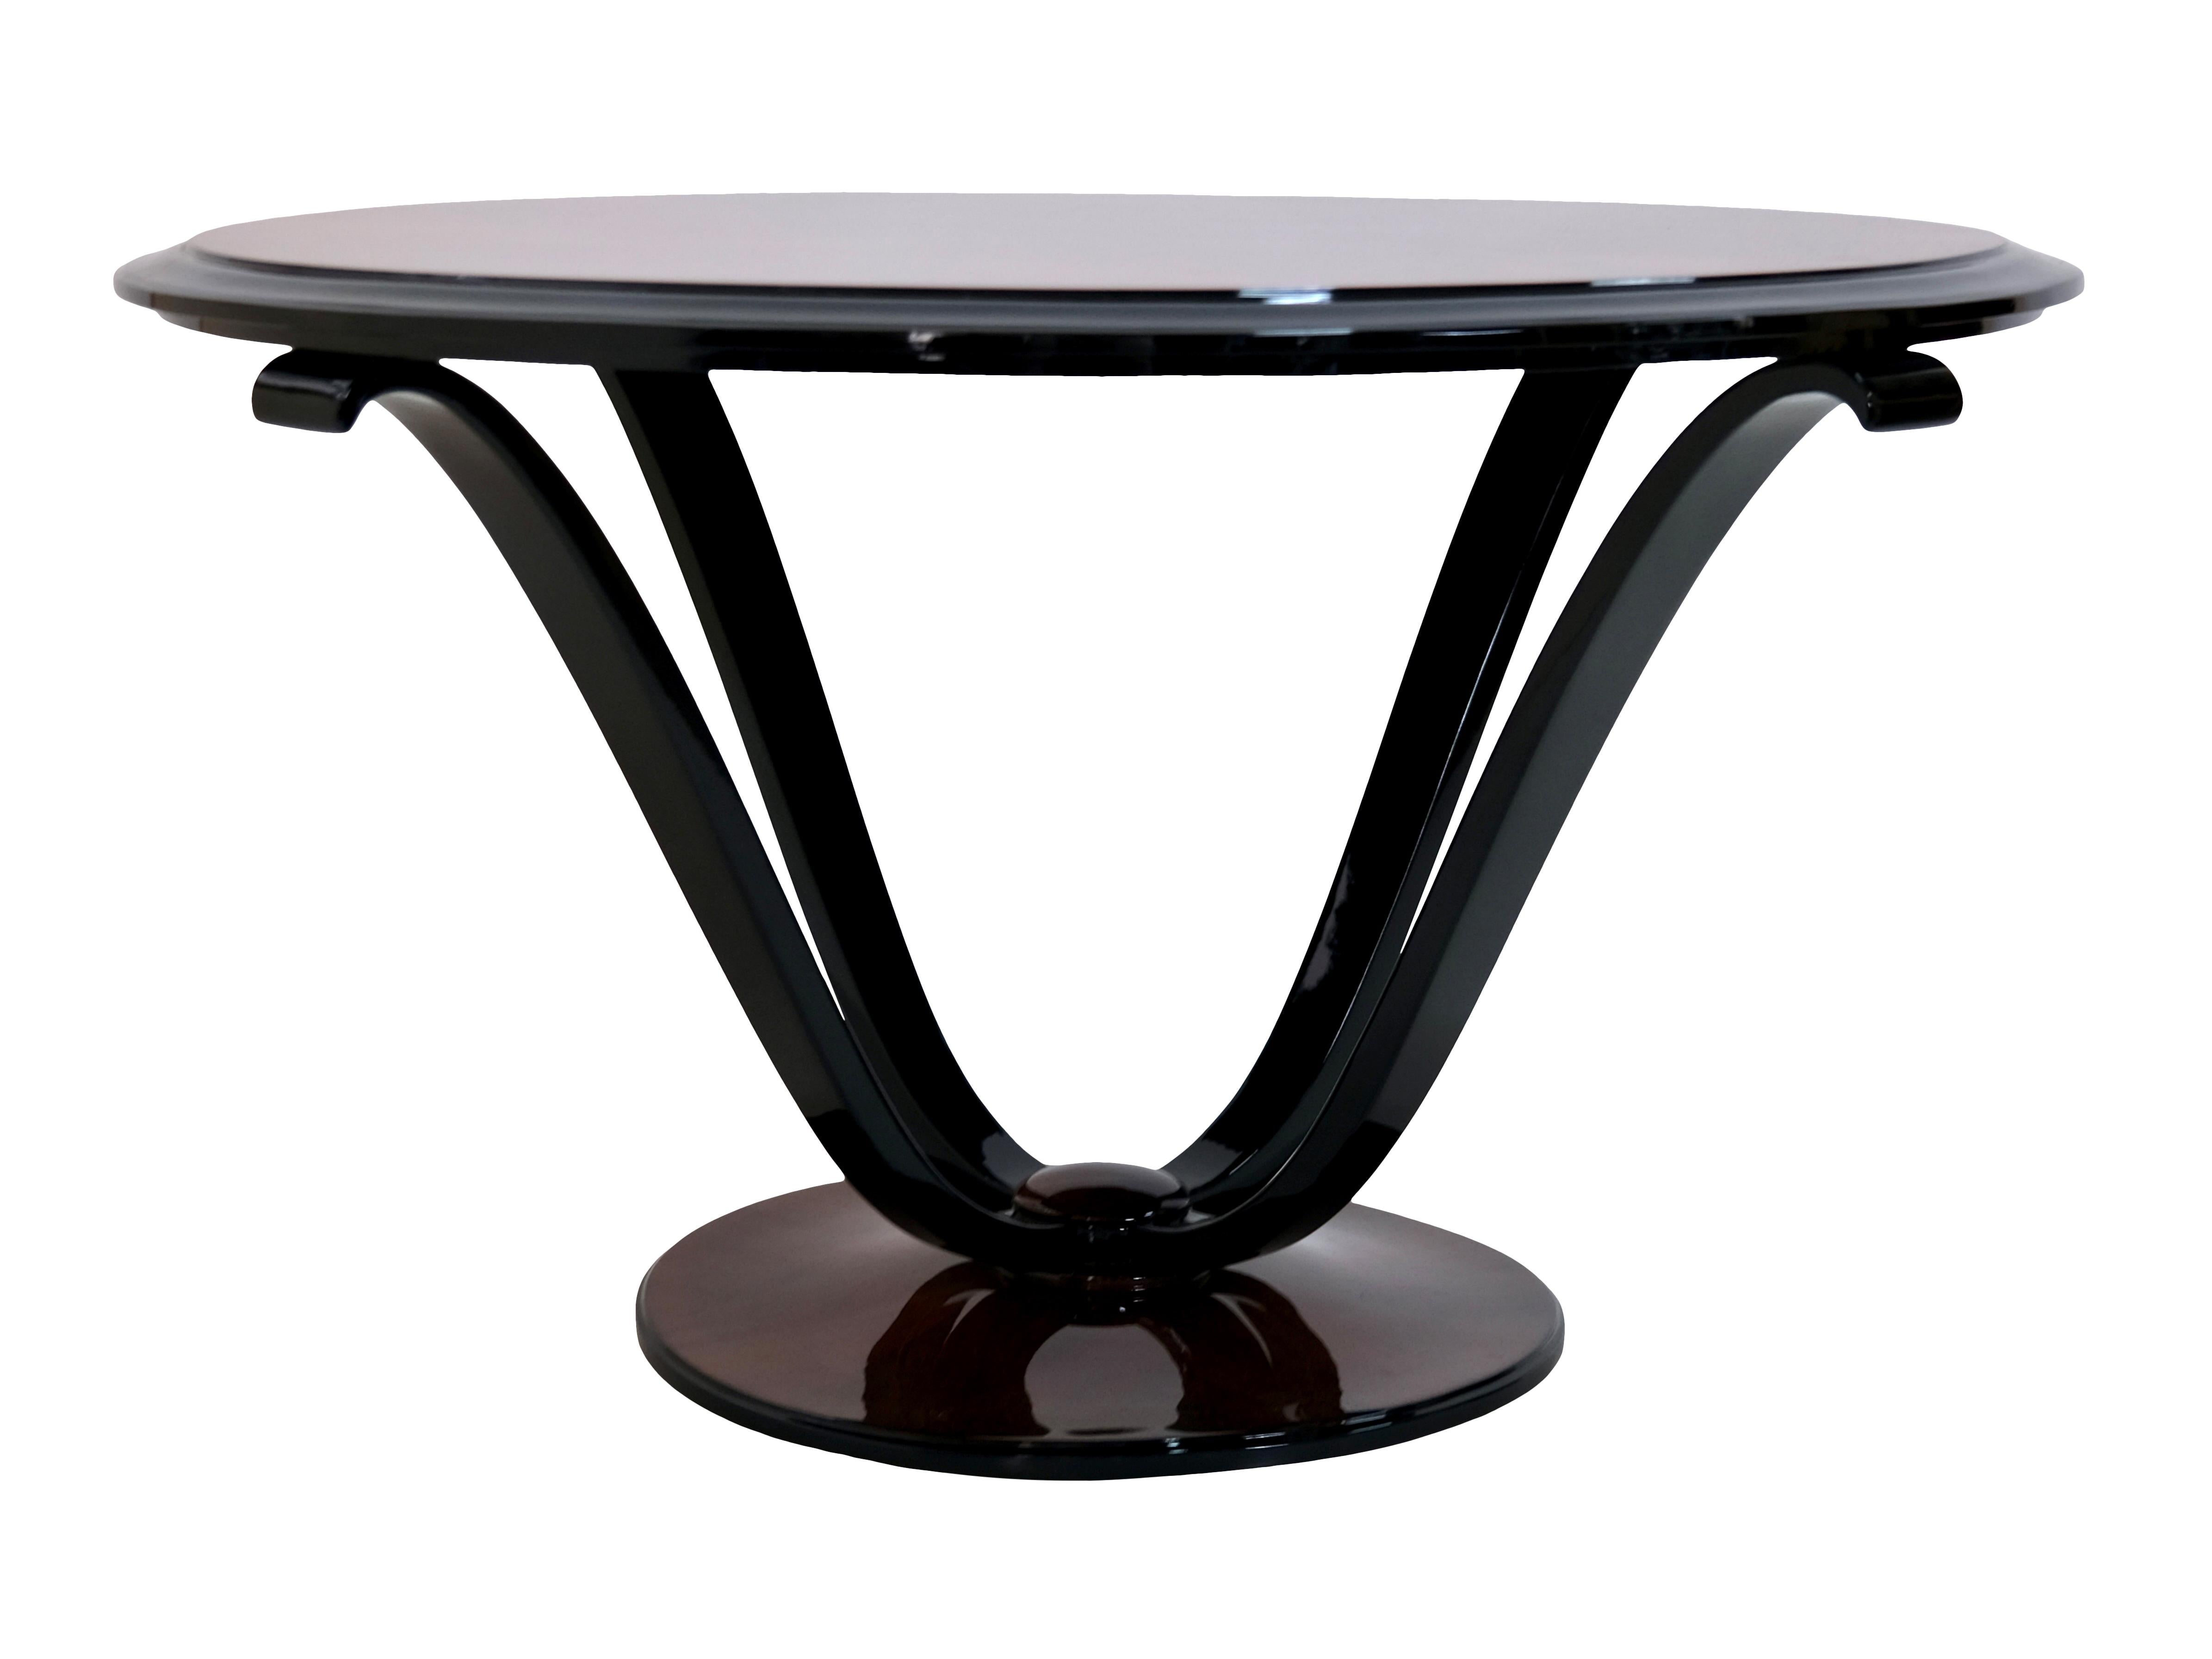 Side table with curved legs in typical shape  
Table top and base in nut wood, high gloss lacquer 
Legs and surrounding of the table top in black piano lacquer, high gloss 

Original Art Deco, France 1930s 

The table was restored very